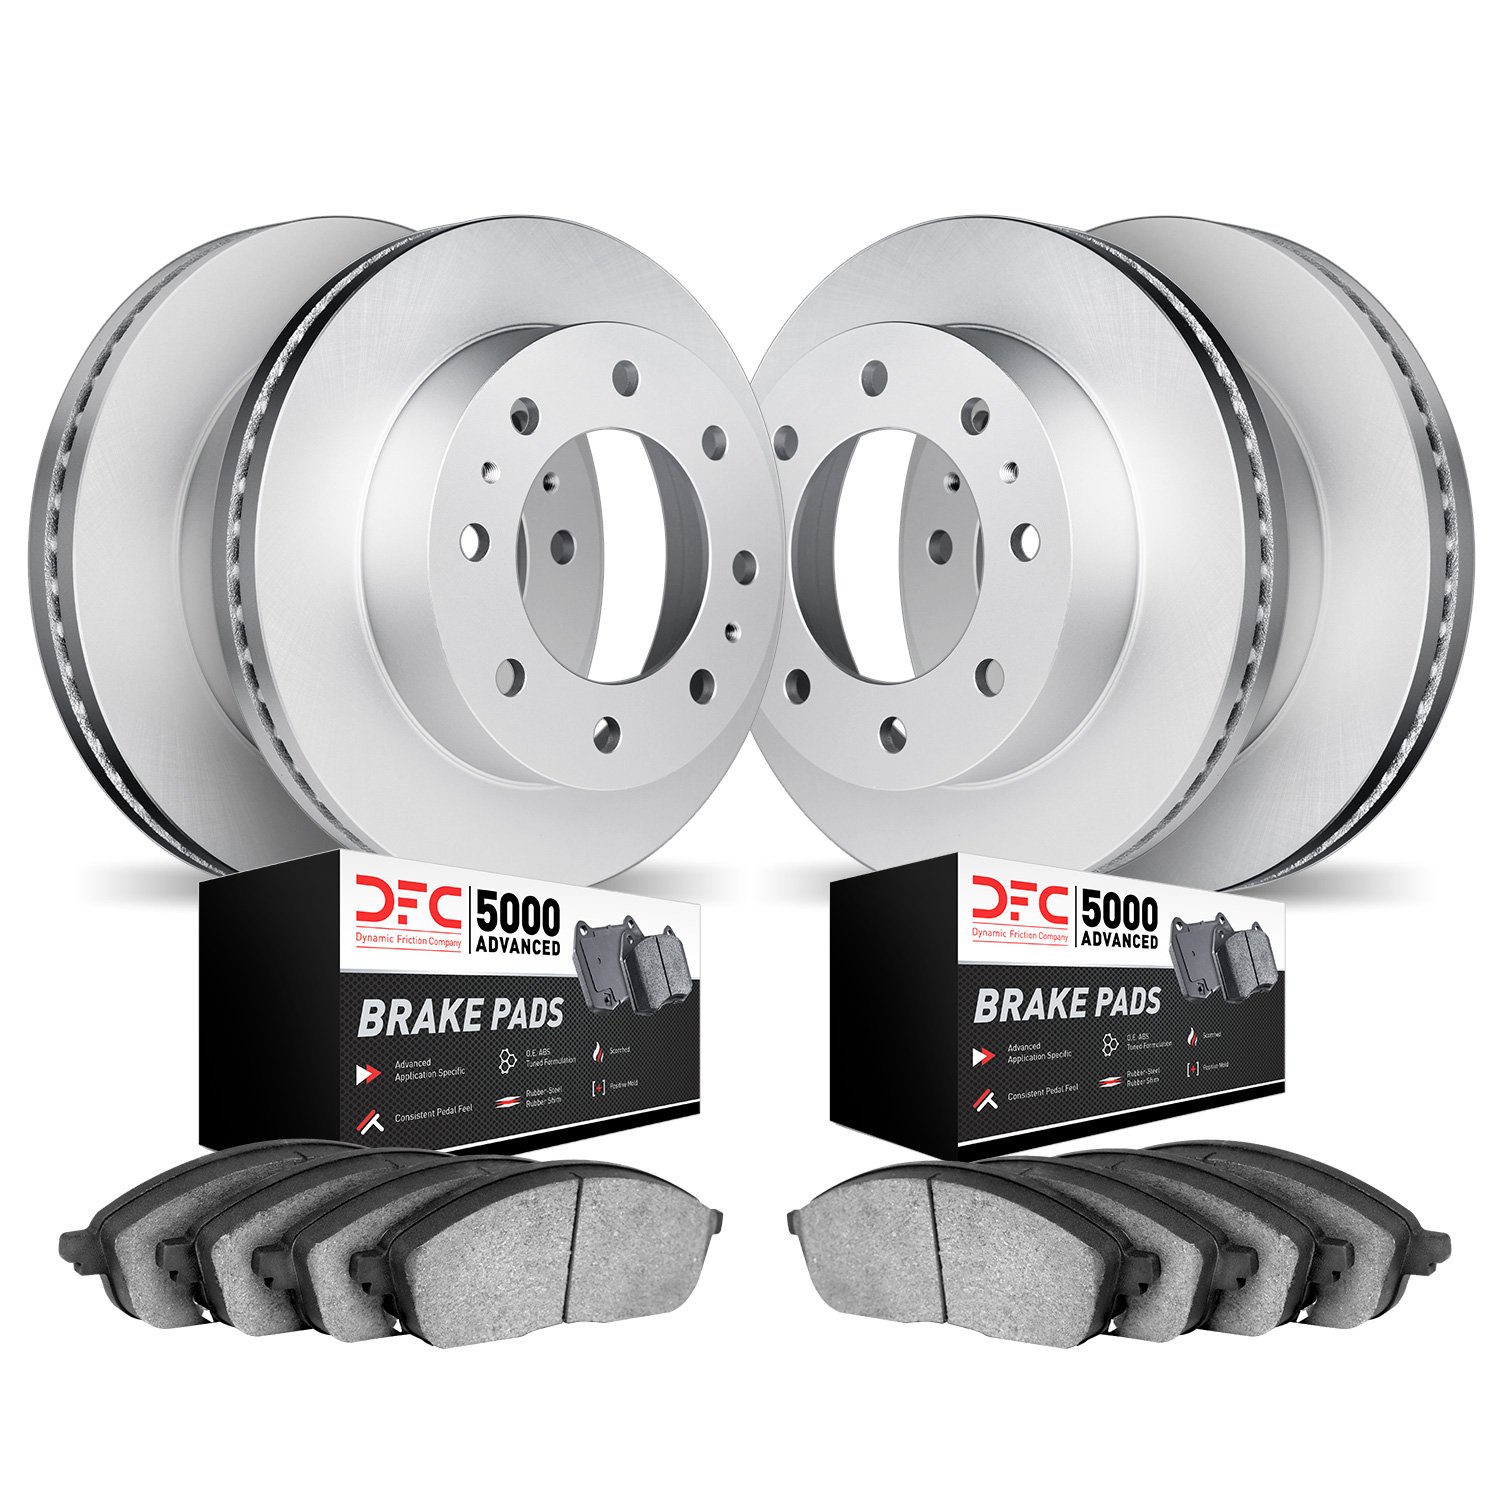 4504-48014 Geospec Brake Rotors w/5000 Advanced Brake Pads Kit, 2001-2010 GM, Position: Front and Rear